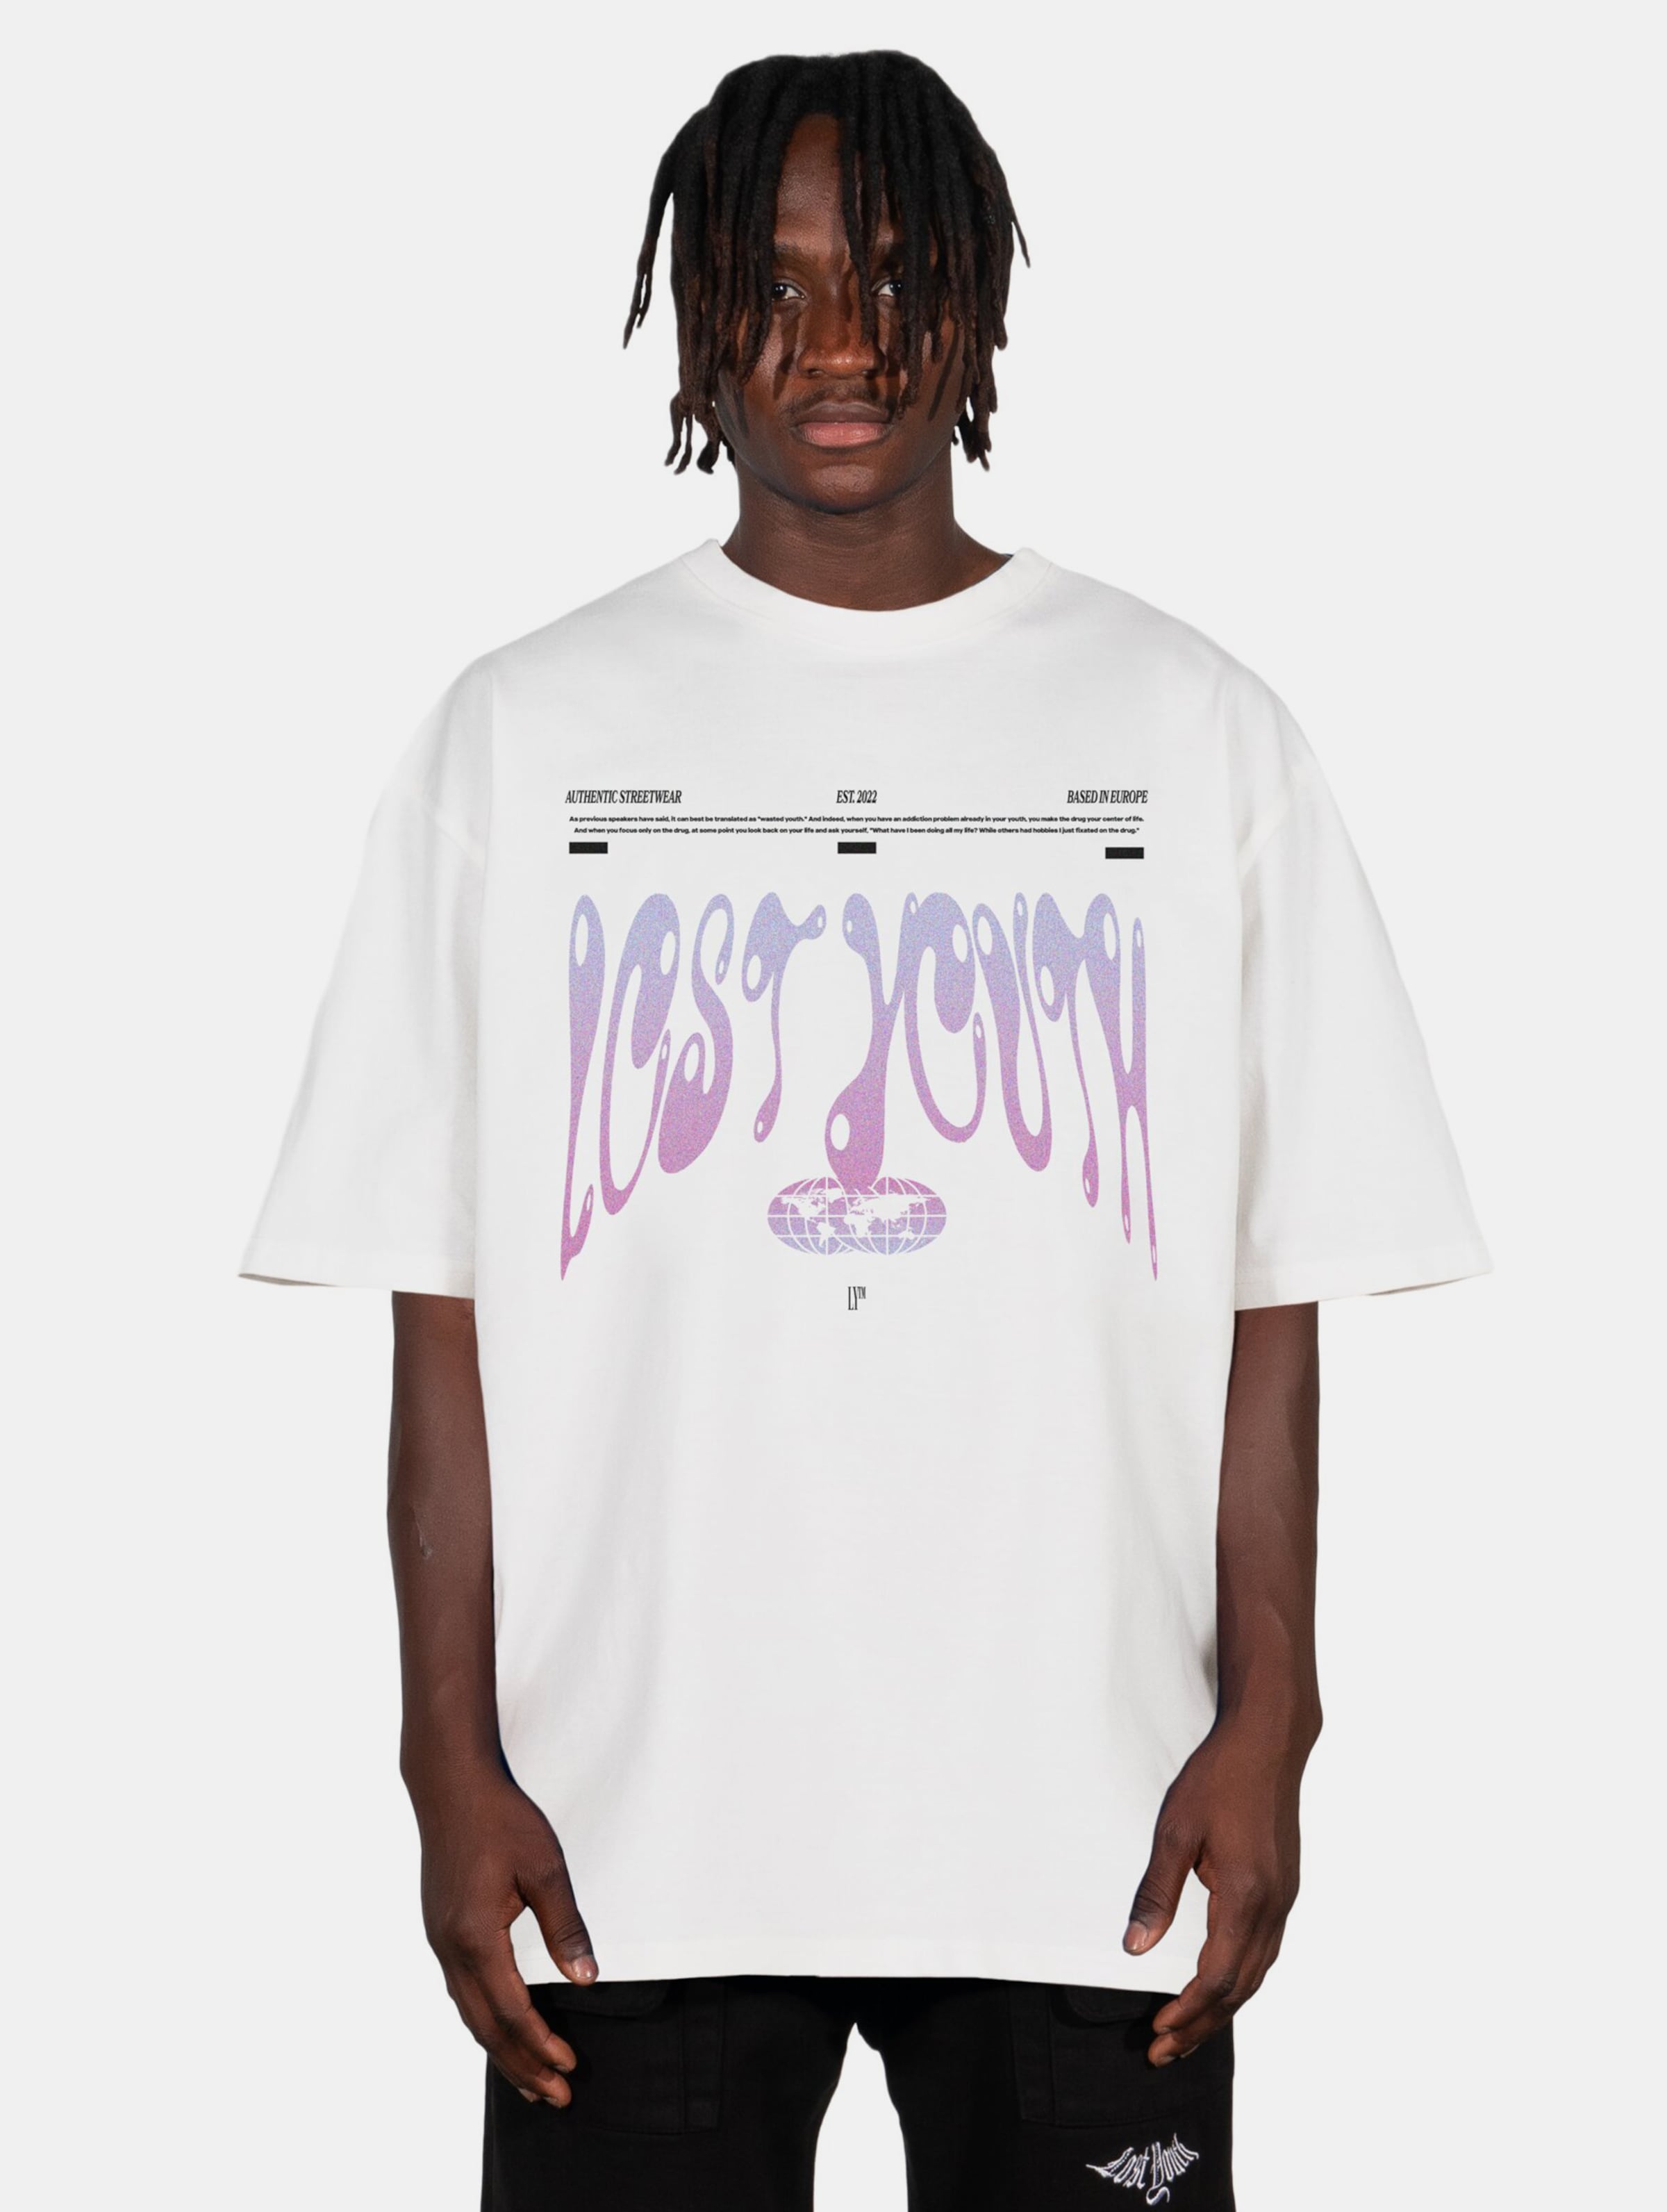 Lost Youth LY TEE- AUTHENTIC Männer,Unisex op kleur wit, Maat XS